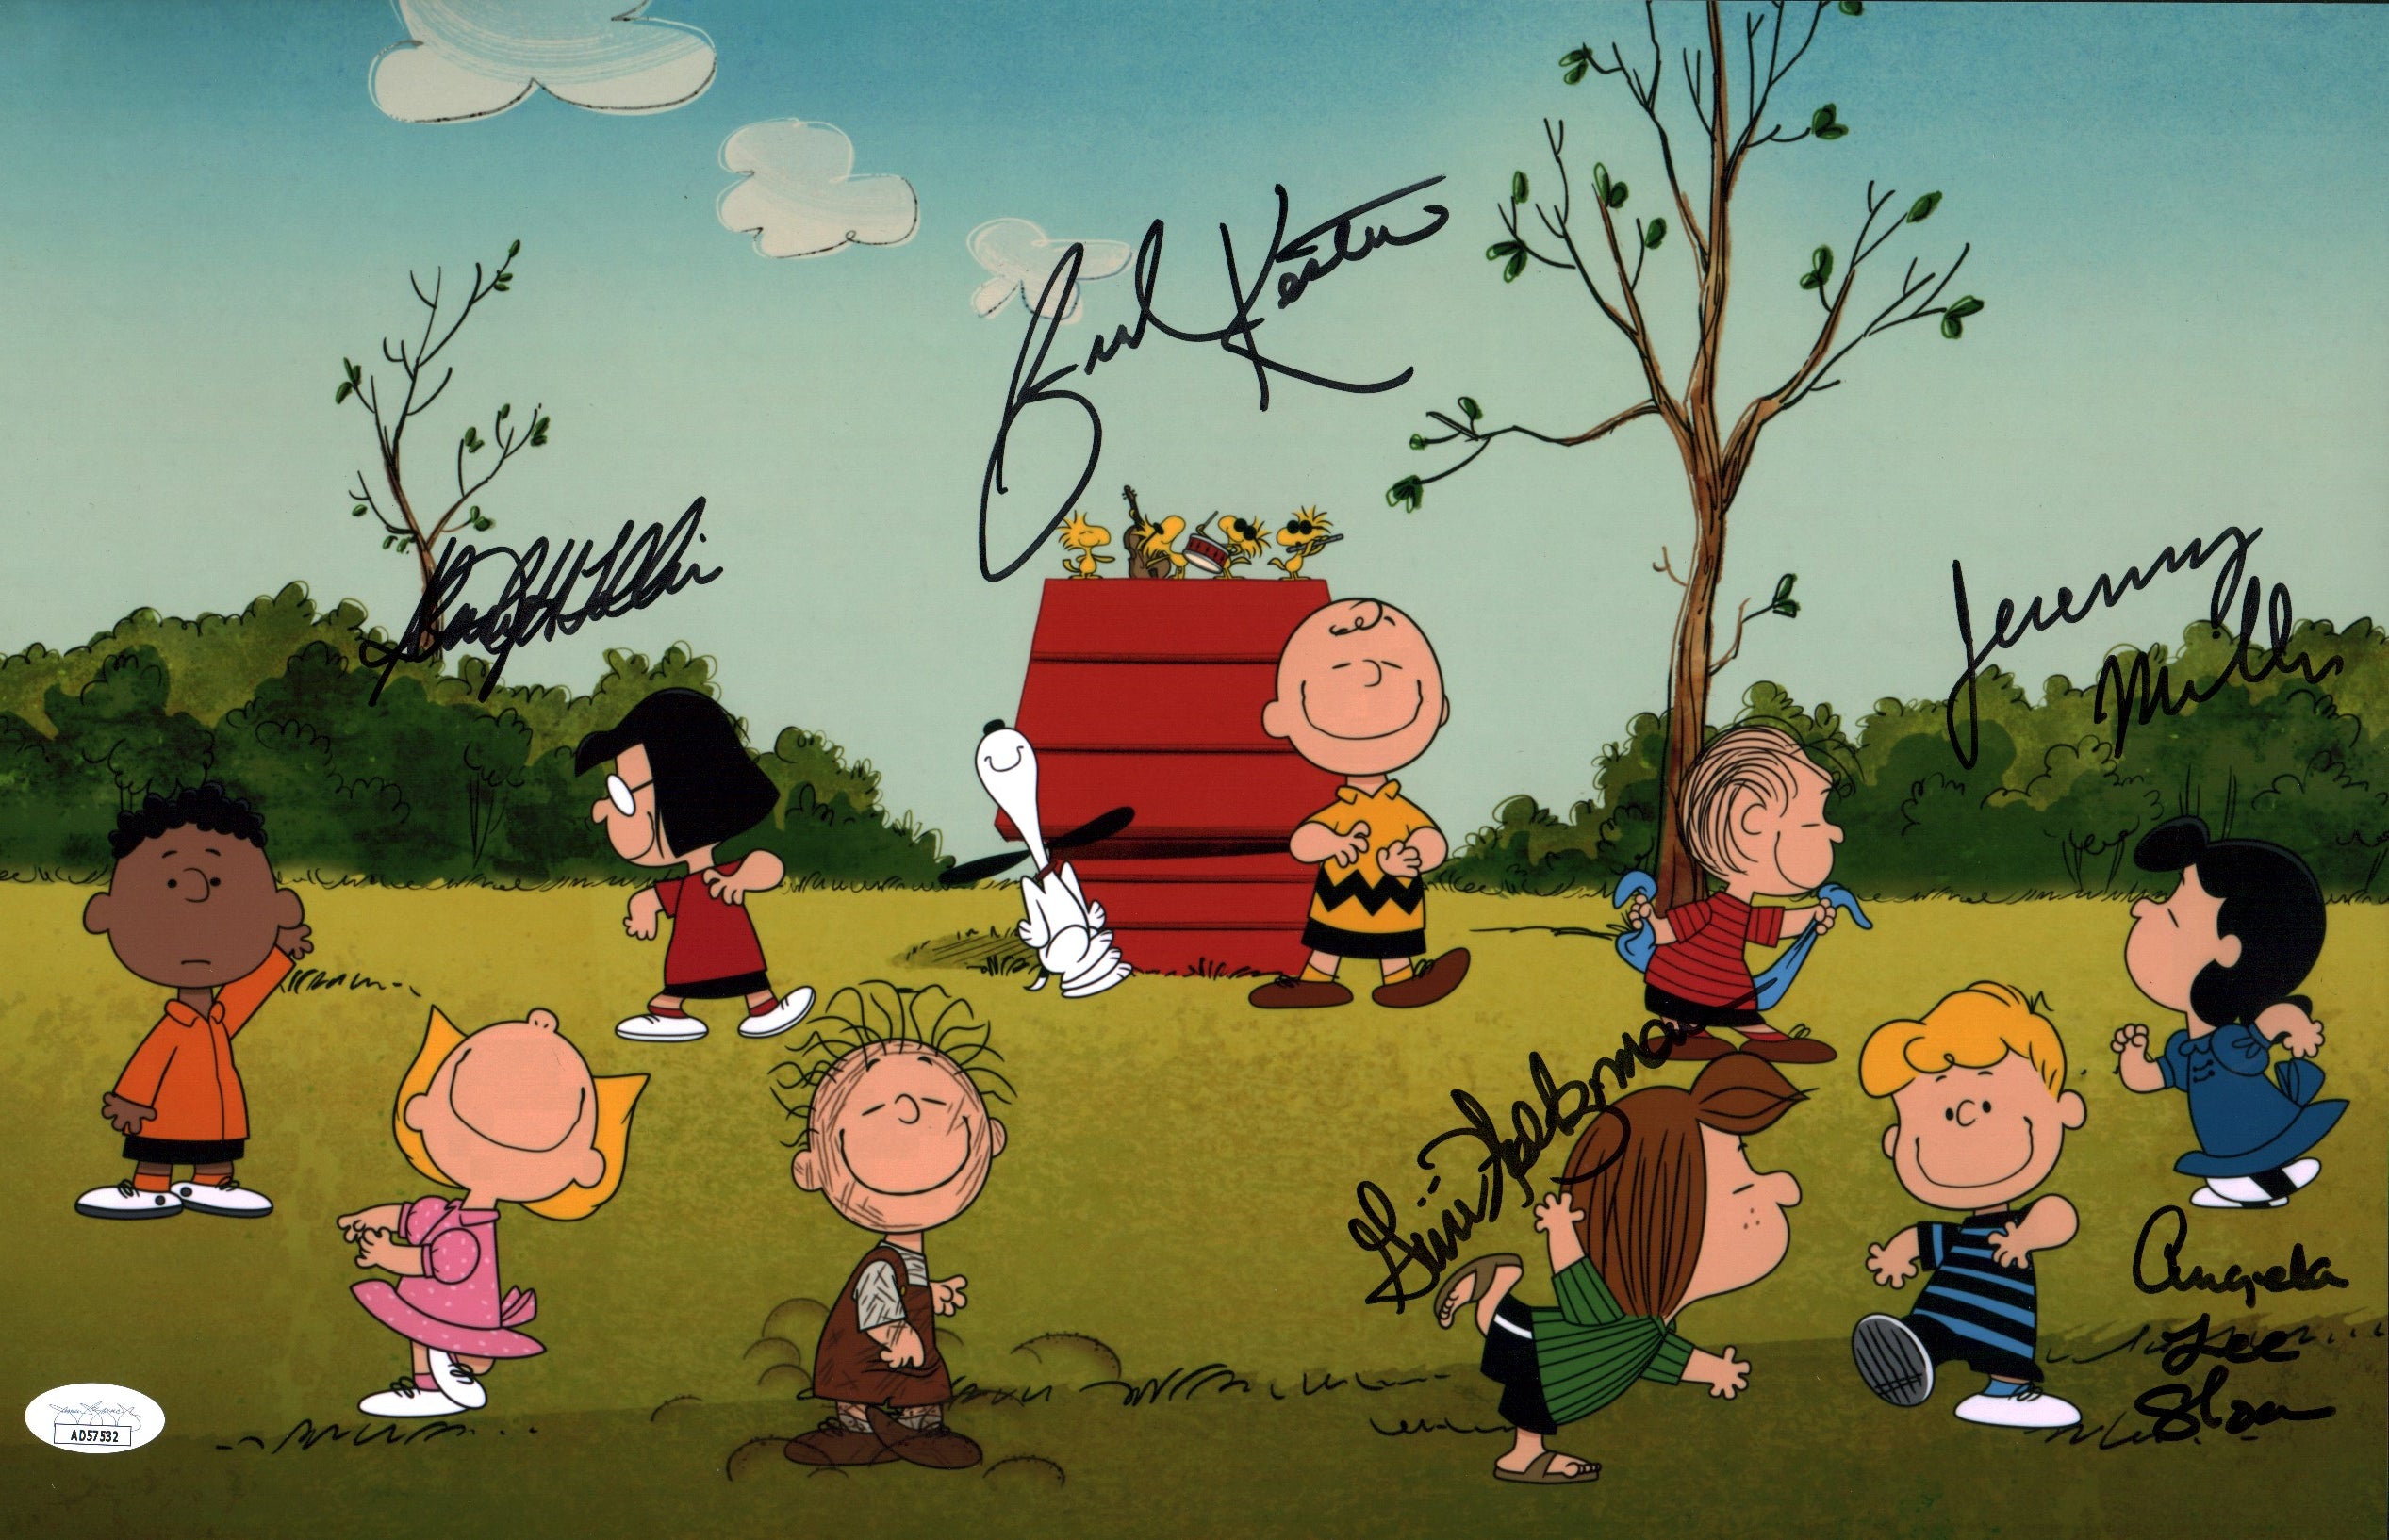 Charlie Brown and Snoopy Show 11x17 Signed Holtzman Kesten Miller Sloan Tolkin Photo Poster JSA COA Certified Autograph